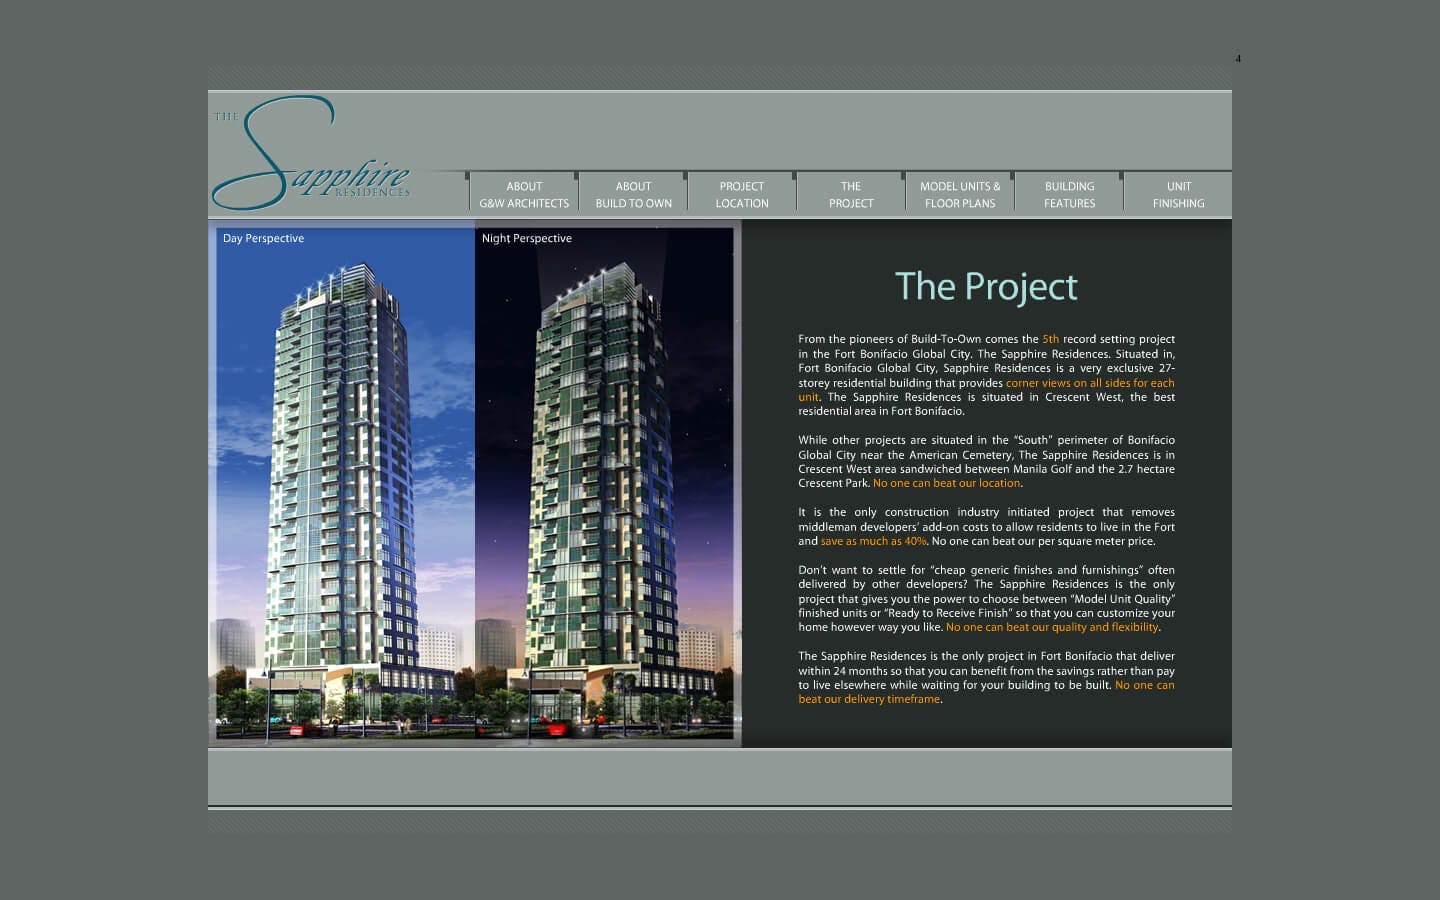 The Sapphire Residences